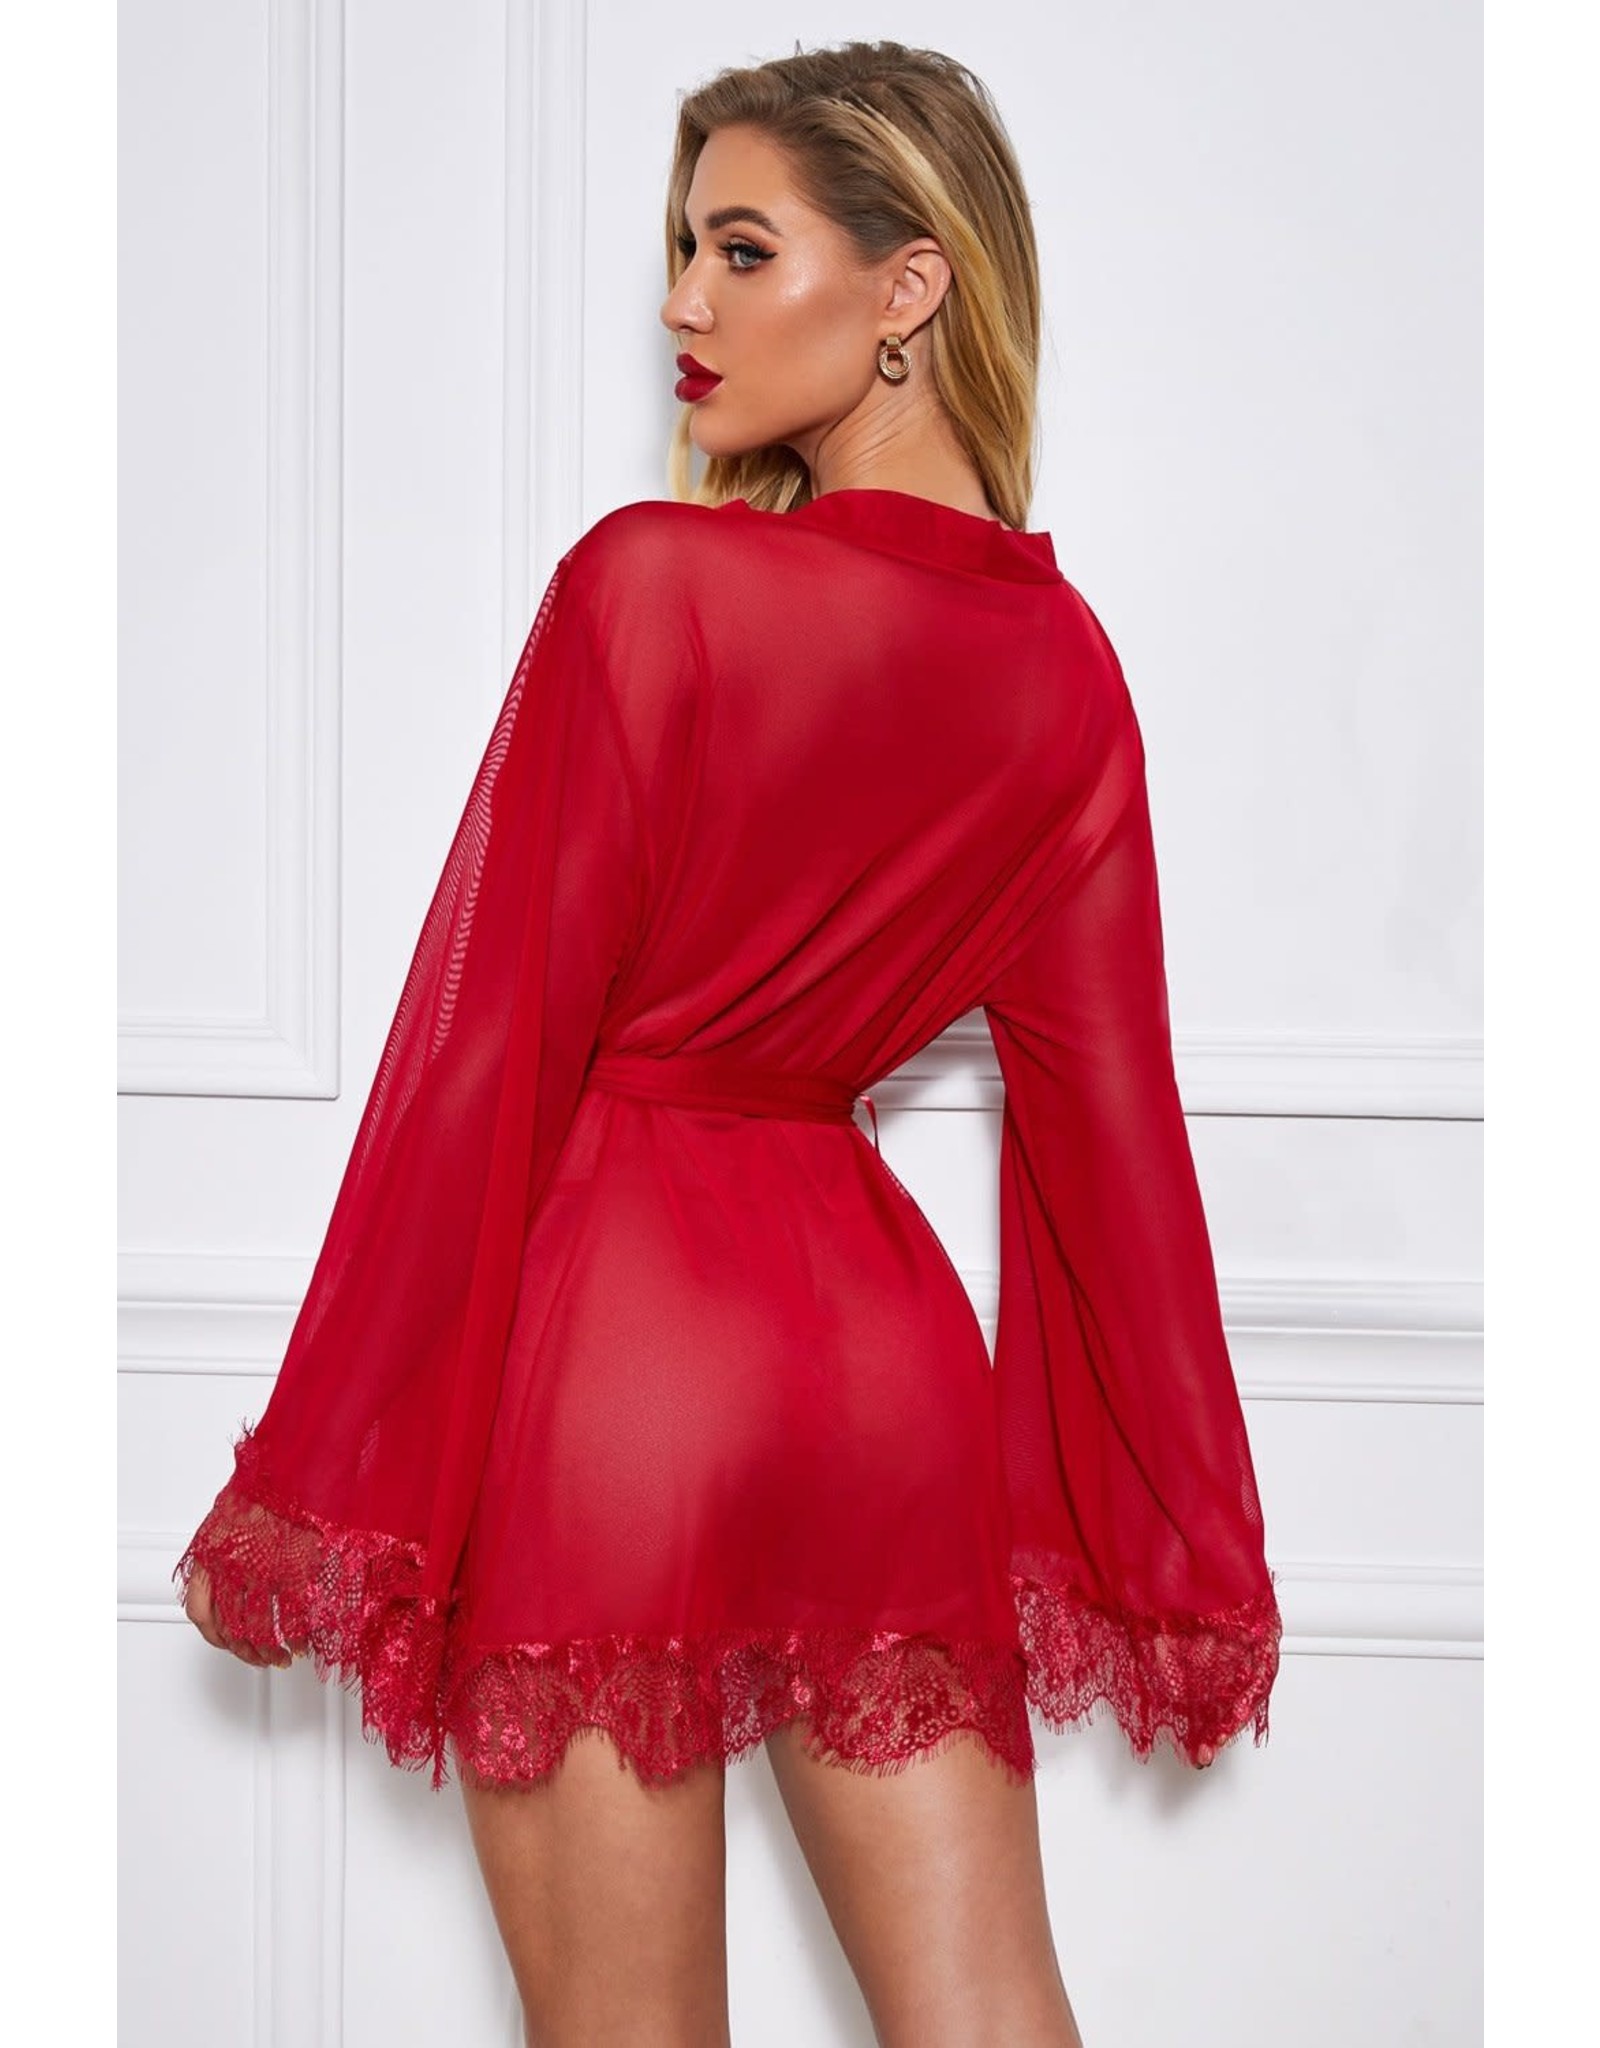 FOREPLAY BELL SLEEVES WRAPPED ROBE WITH THONG - (US 12-14)L